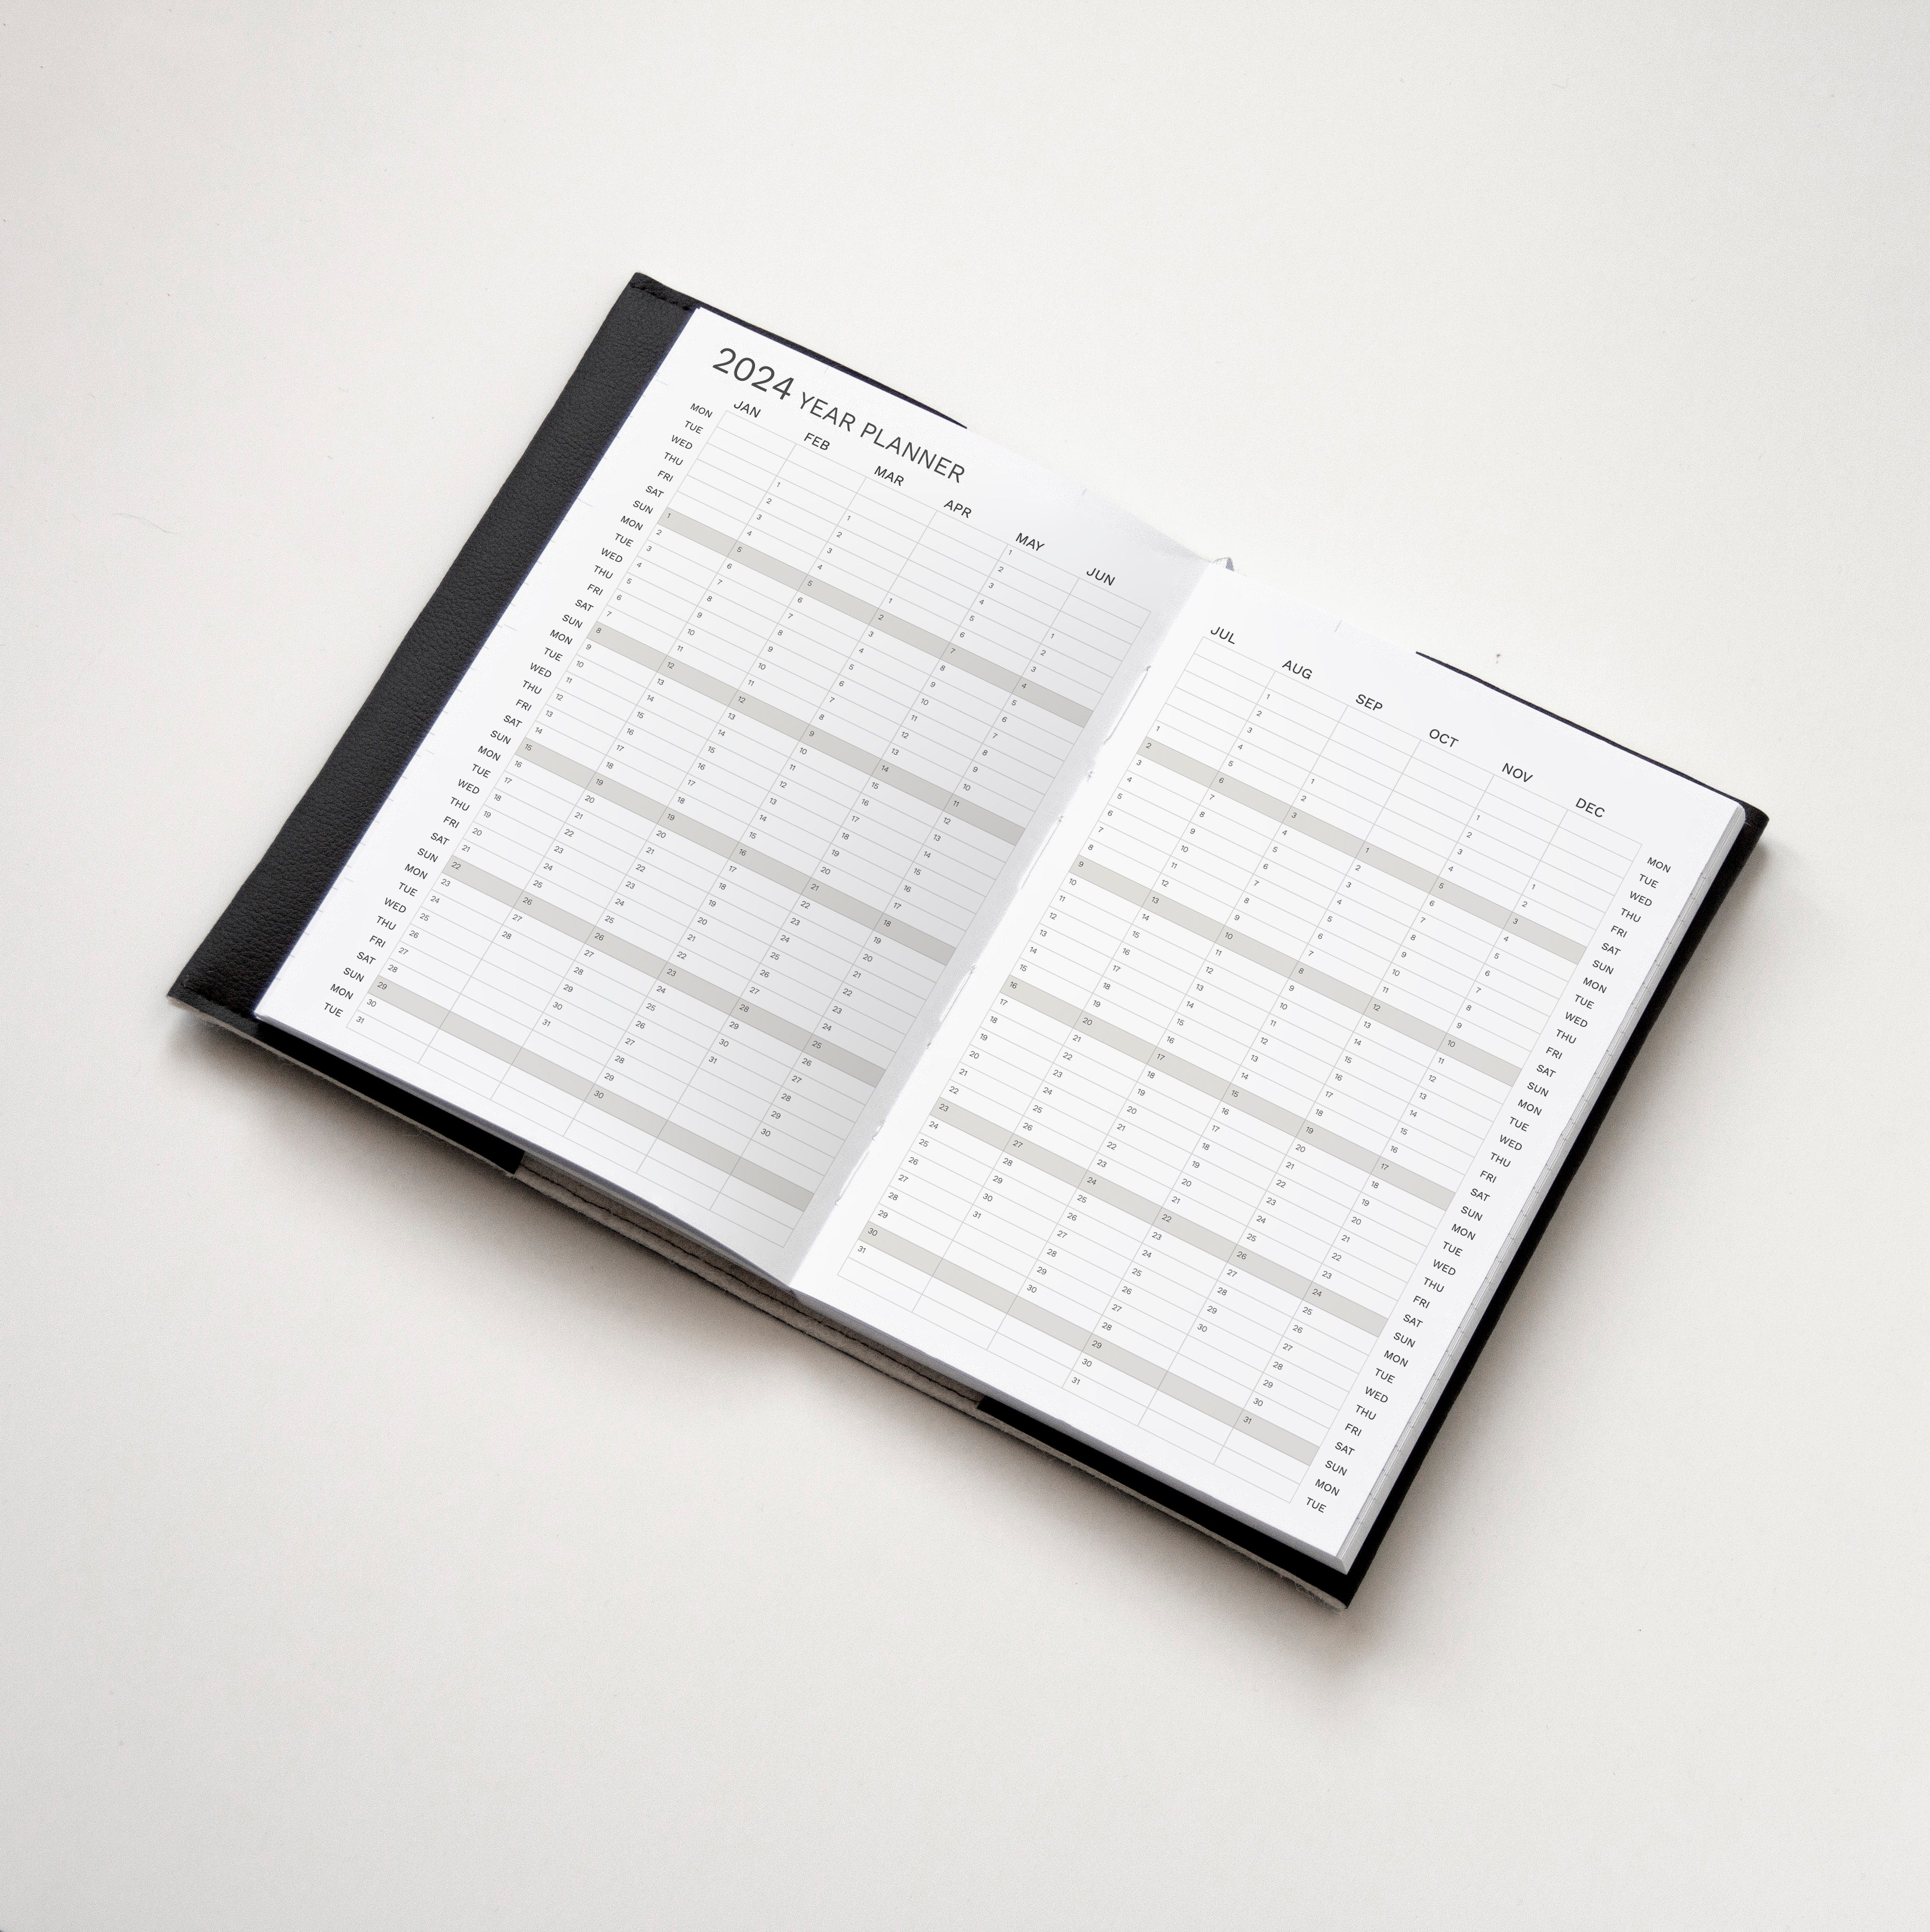 OCTÀGON DESIGN | 2024 PRO Weekly Planner | Vegan leather cover | 2024 year planner template.